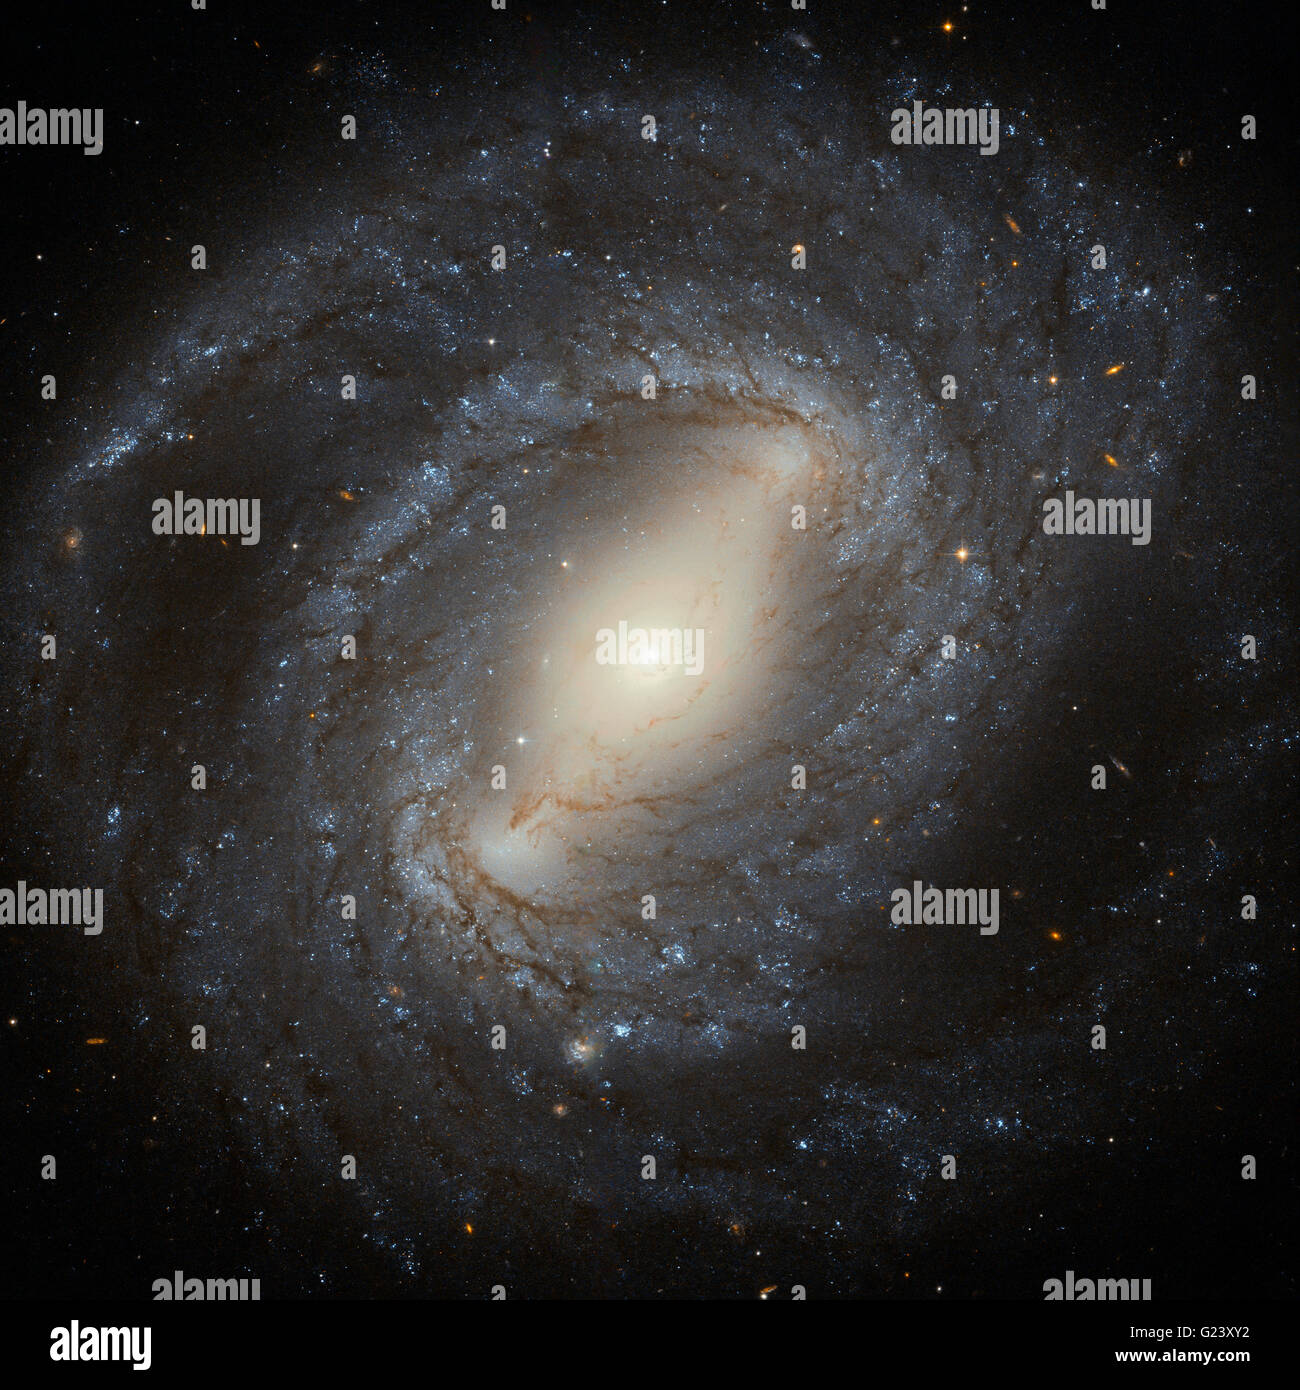 The galaxy system with a bright optical centre. Stock Photo